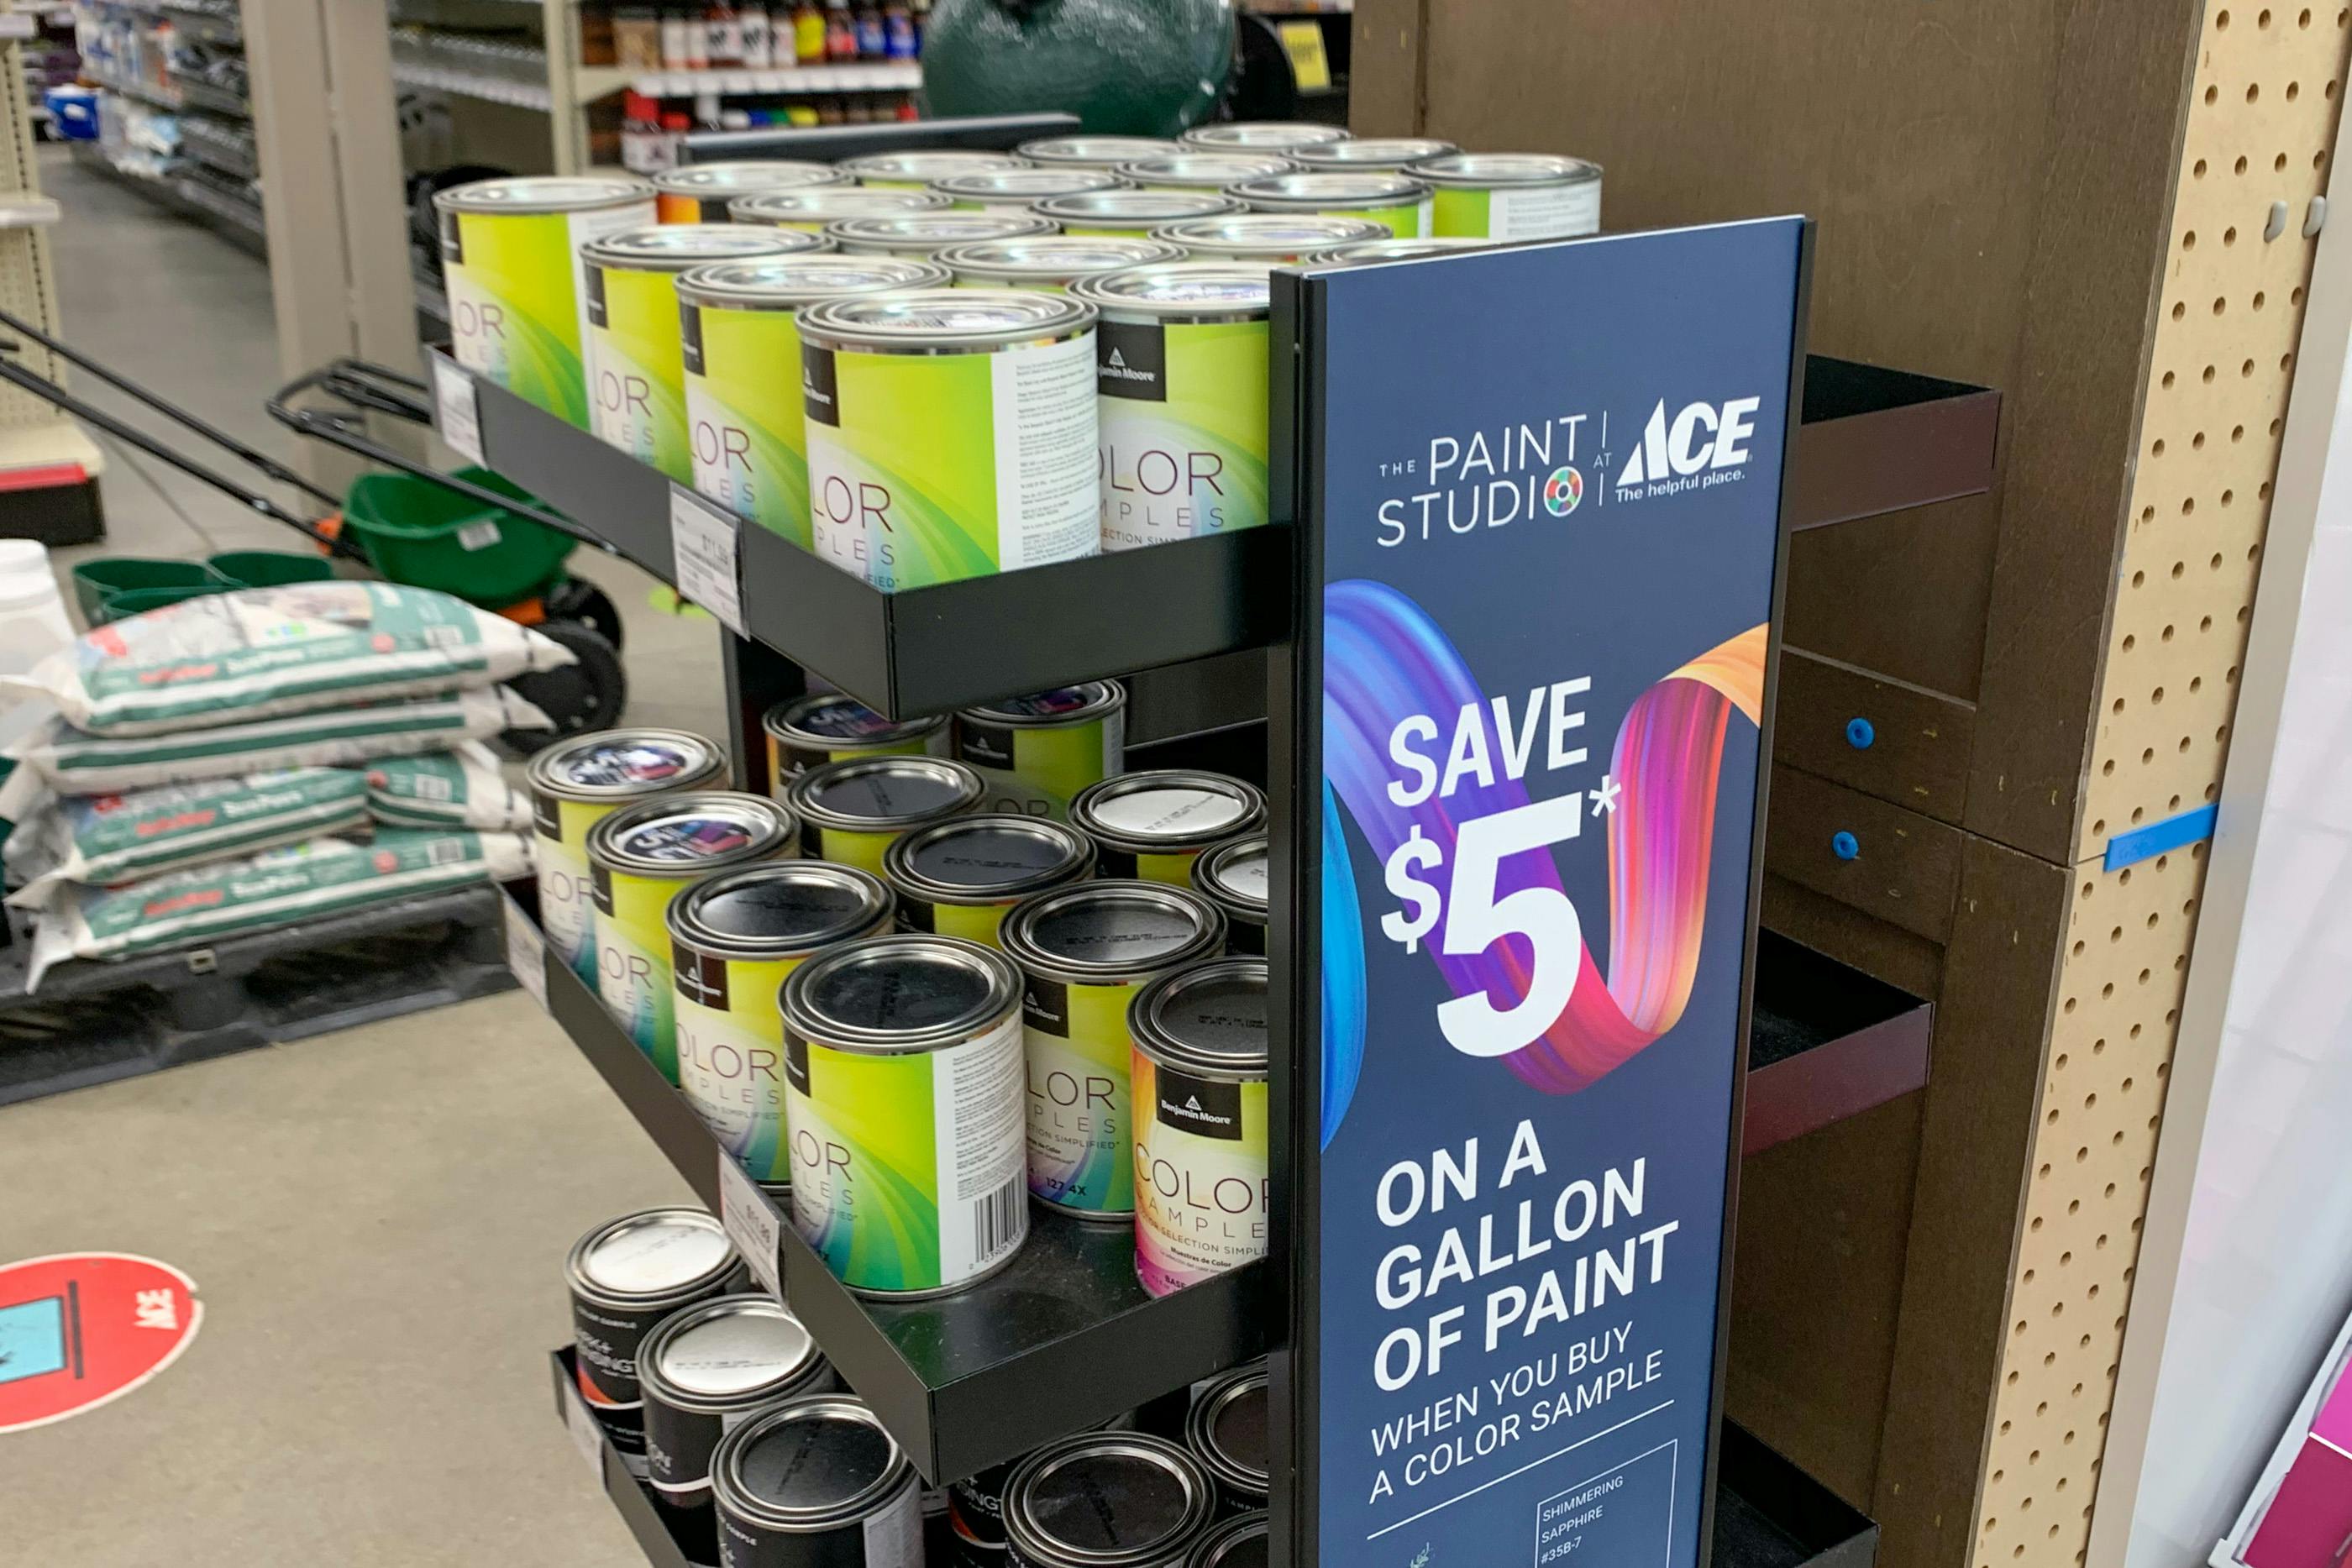 ace hardware sample paint section with an offer of $5 off a gallon of paint when you buy a sample